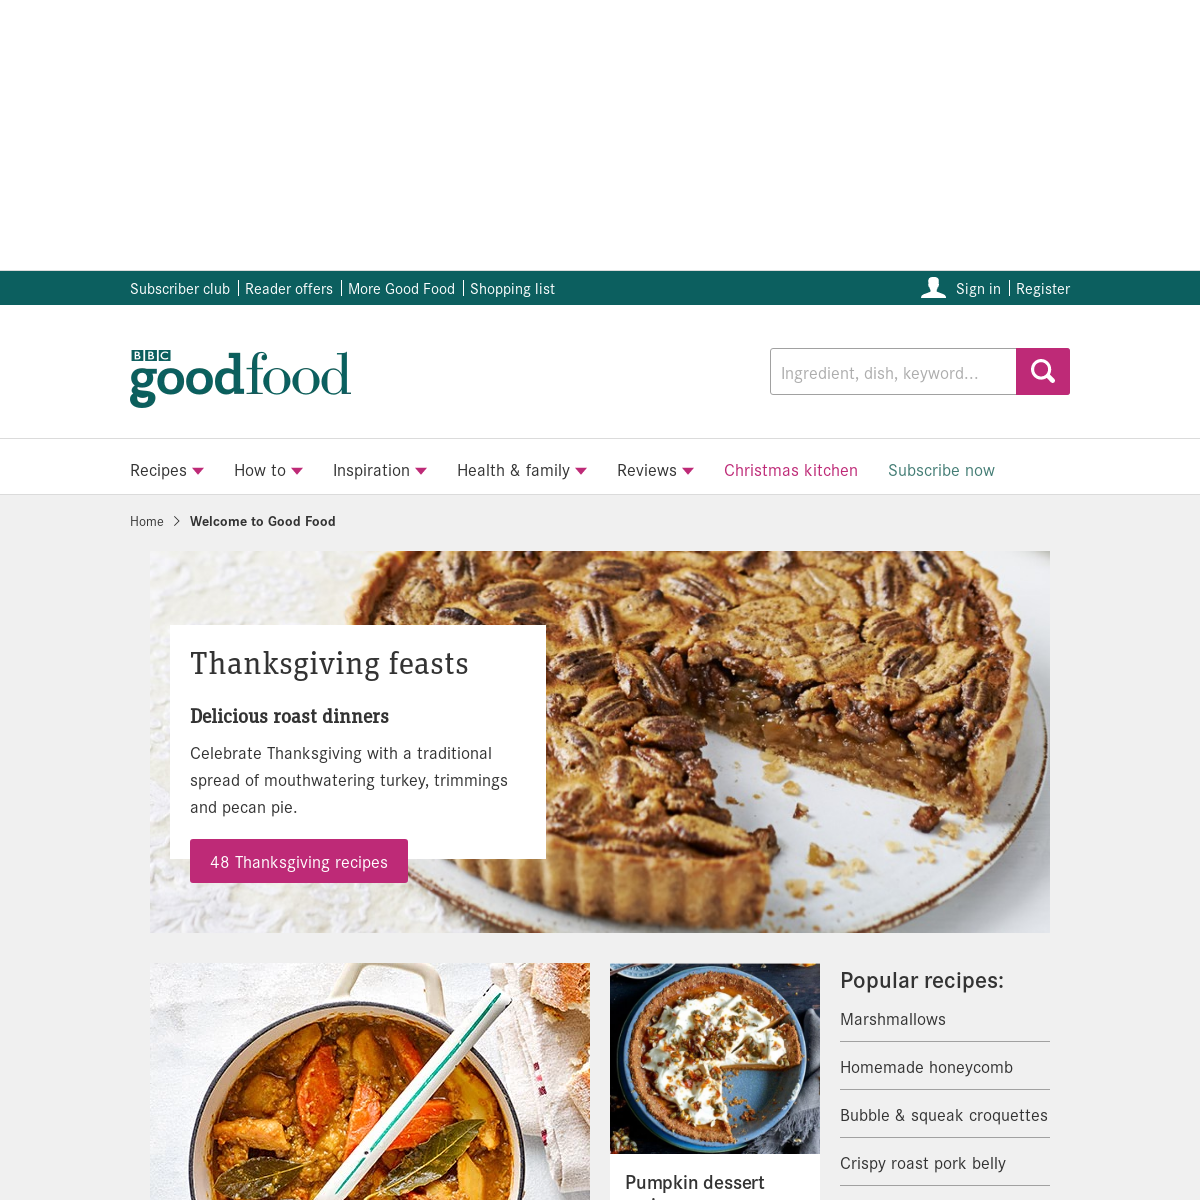 A complete backup of bbcgoodfood.com